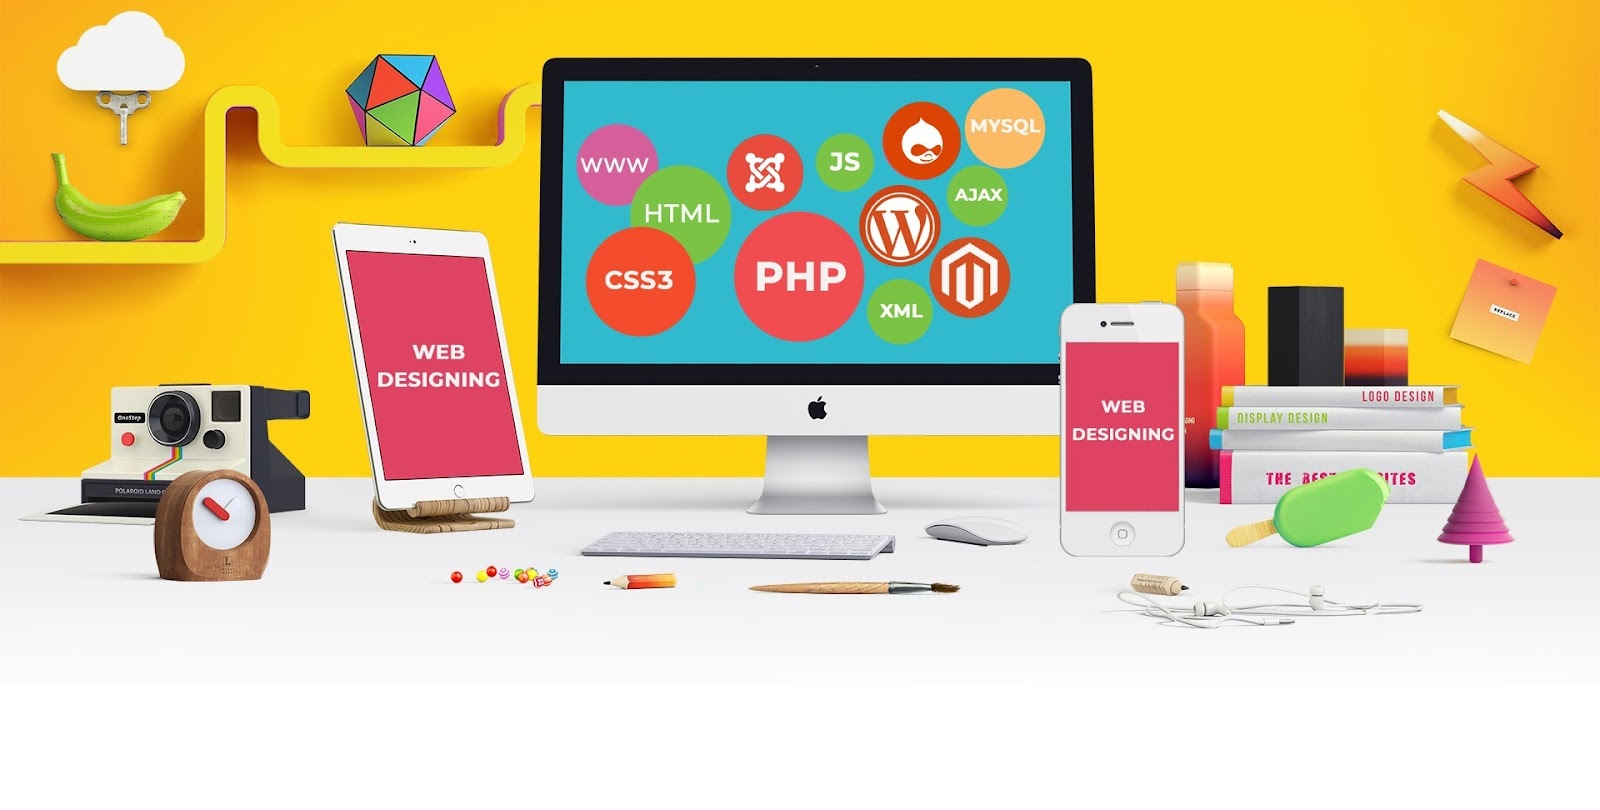 IM Solutions is the best website design & development company in Bangalore. We provide professional web designing services to turn your imagination into reality.